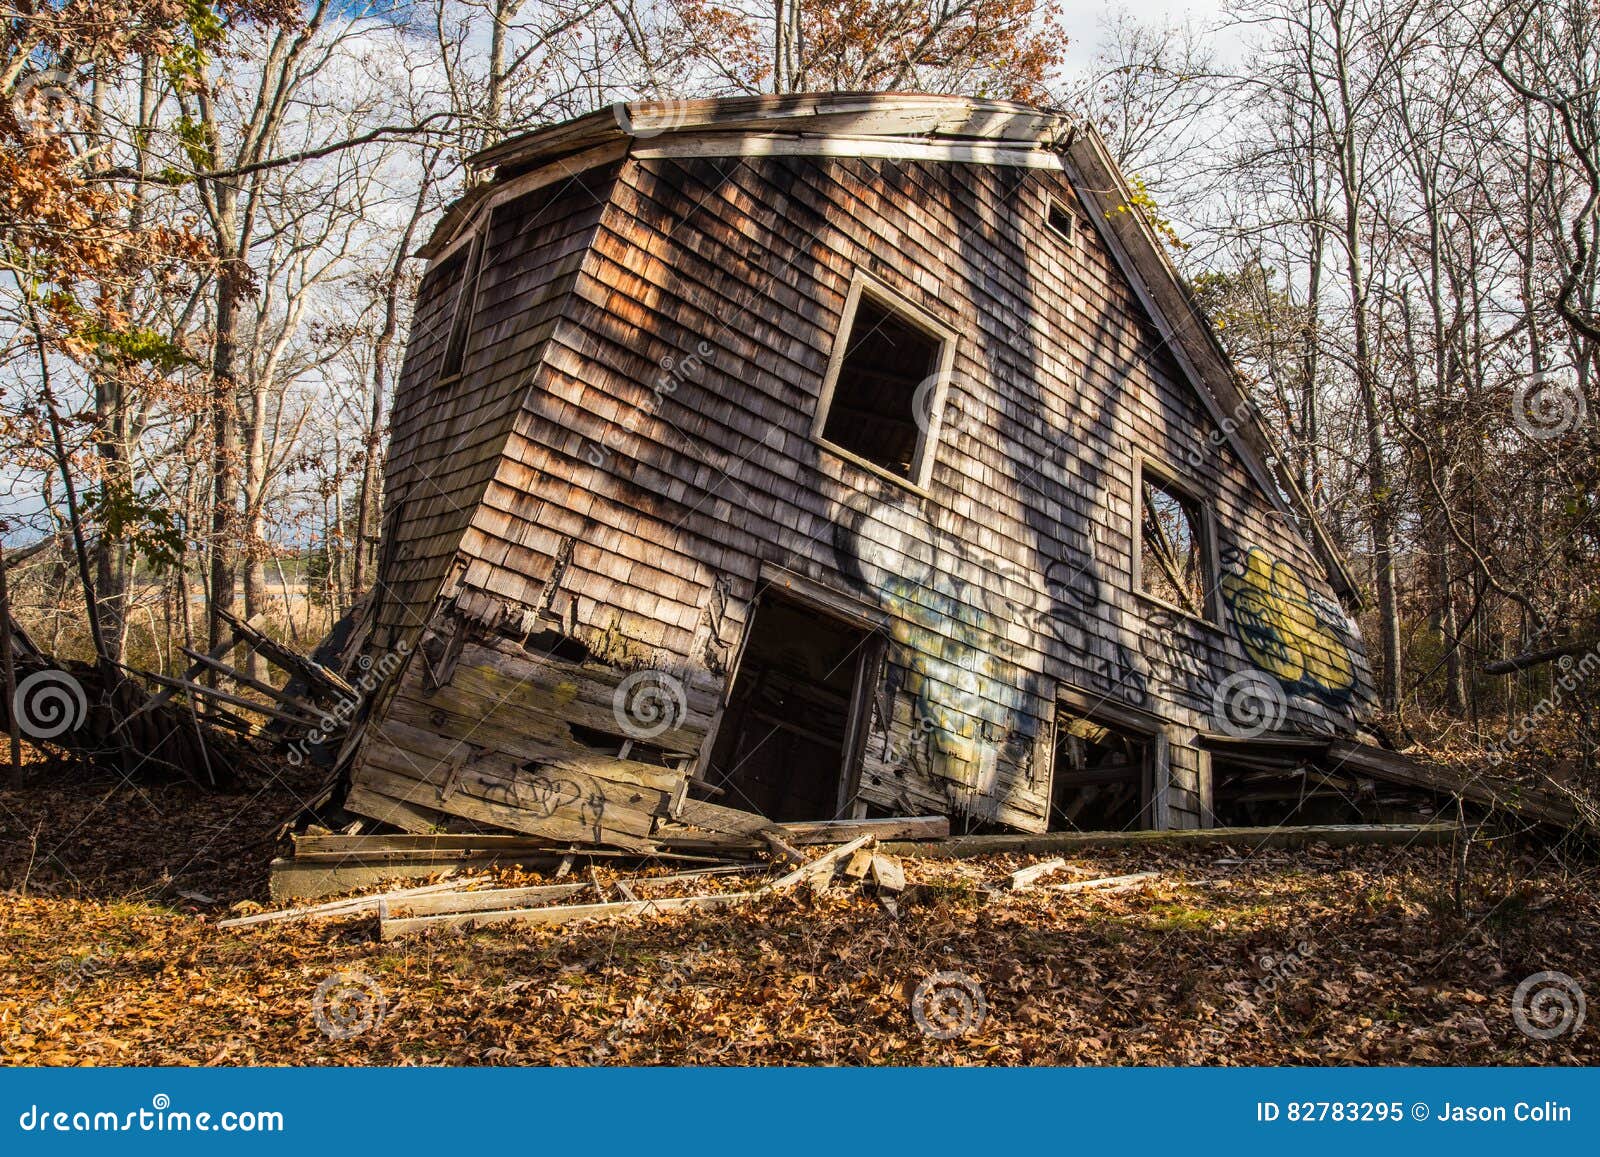 a dilapidated home in the woods, sag harbor, new york